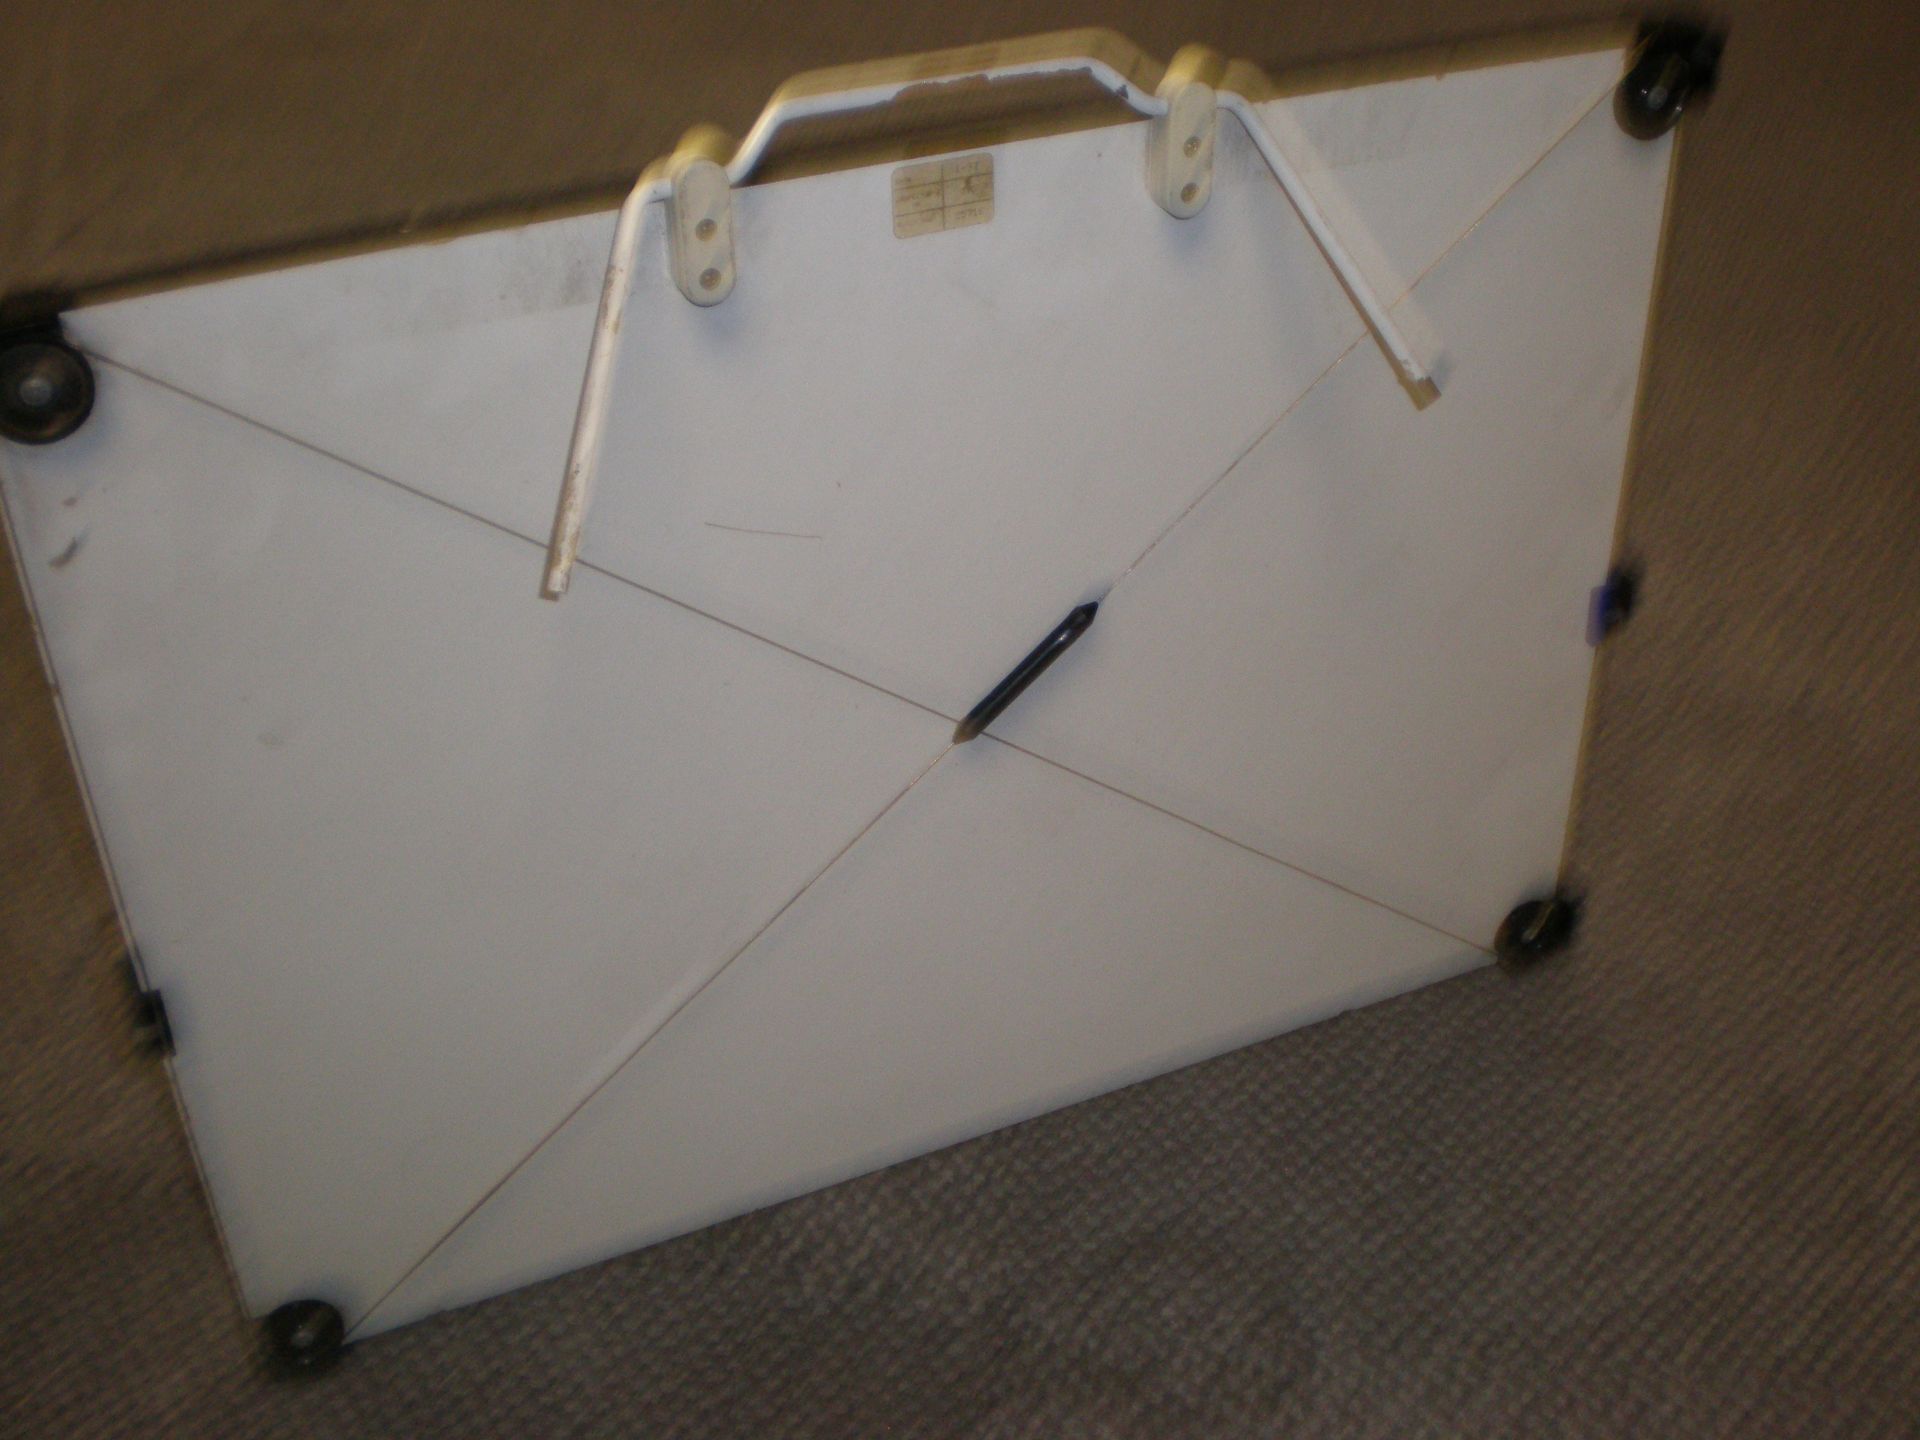 Set Of 23 Desktop Drawing Boards On Trolley With Wheels - Image 8 of 8